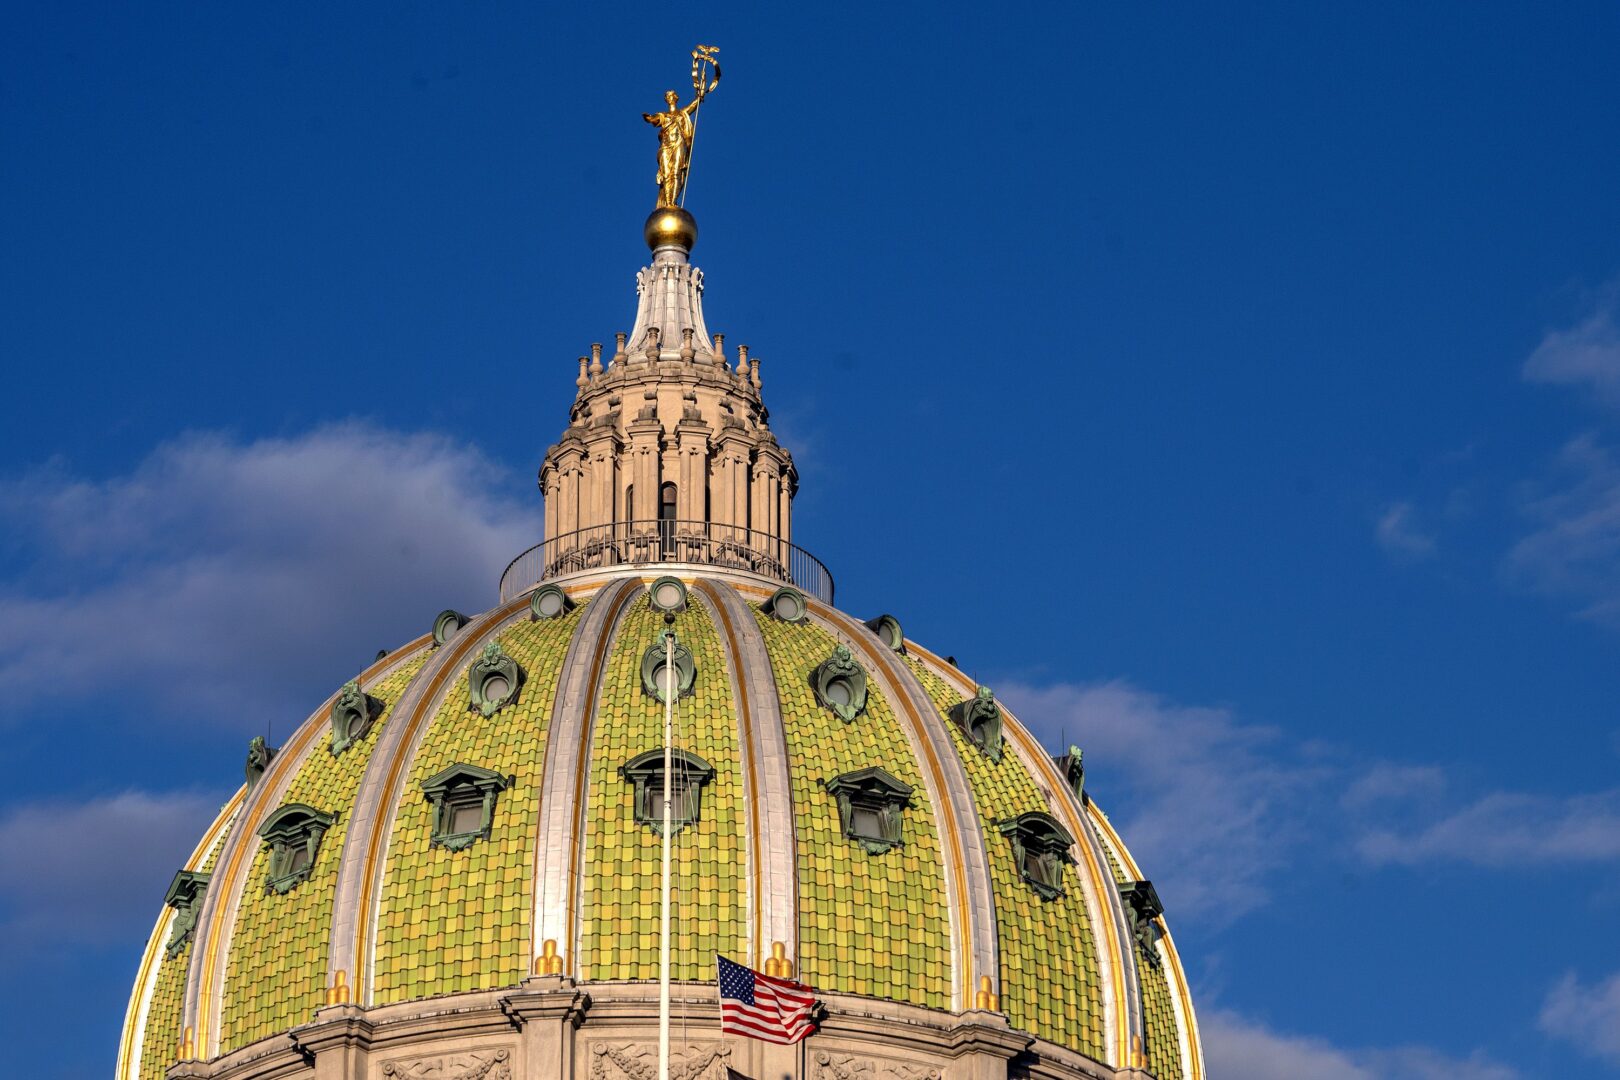 The dome of the Pennsylvania Capitol building in Harrisburg.